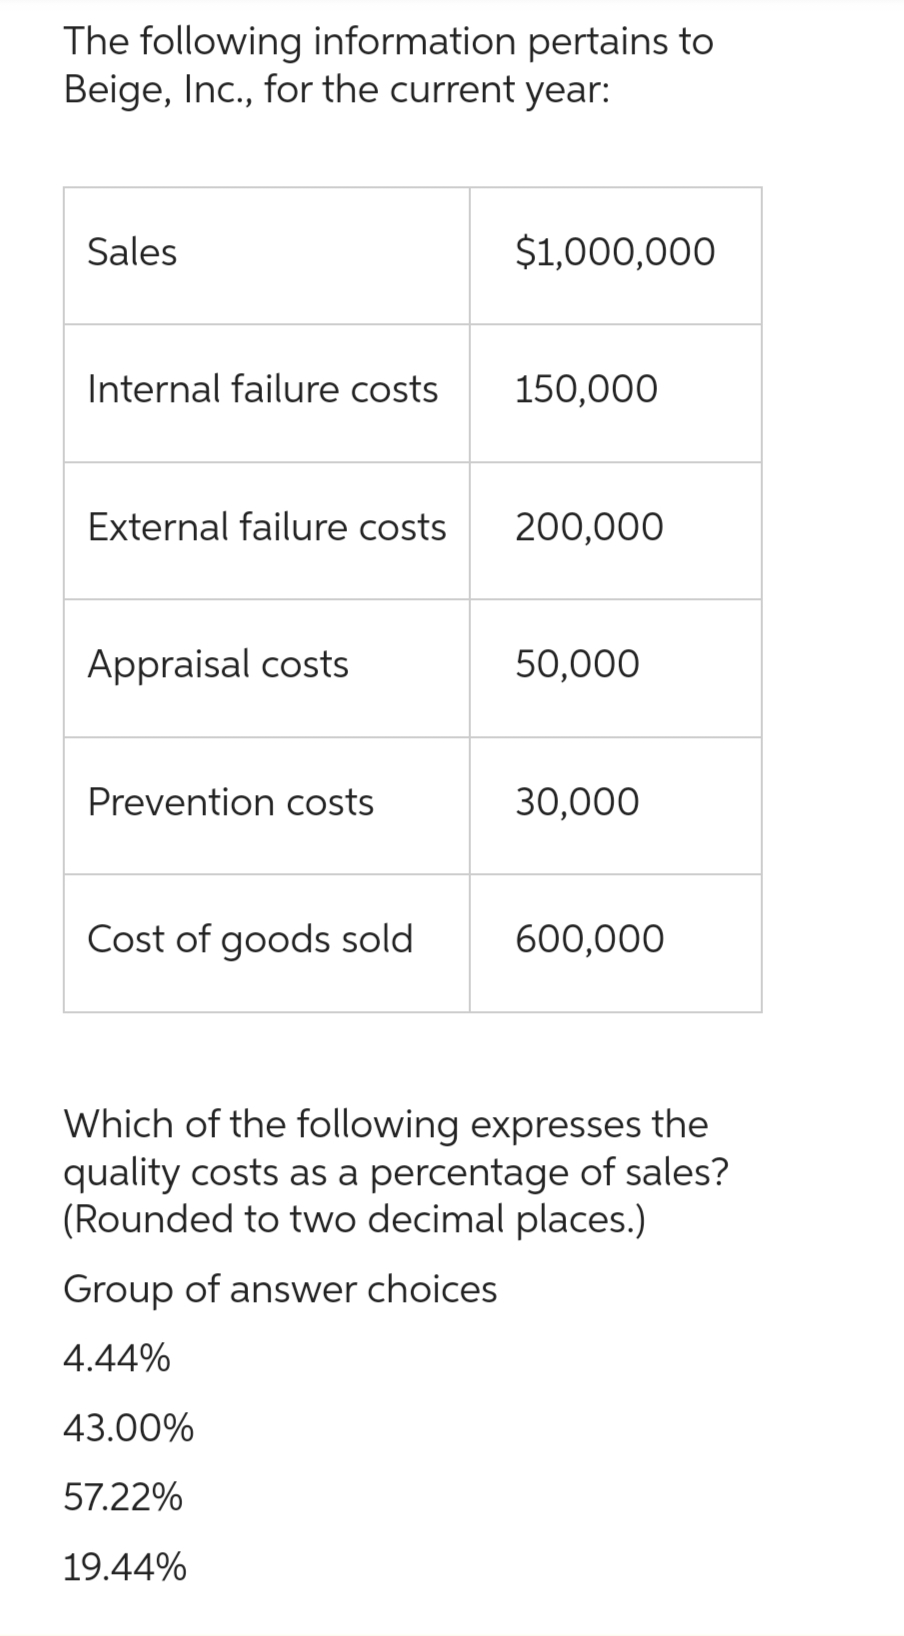 The following information pertains to
Beige, Inc., for the current year:
Sales
Internal failure costs
External failure costs
Appraisal costs
Prevention costs
Cost of goods sold
$1,000,000
150,000
200,000
50,000
30,000
600,000
Which of the following expresses the
quality costs as a percentage of sales?
(Rounded to two decimal places.)
Group of answer choices
4.44%
43.00%
57.22%
19.44%